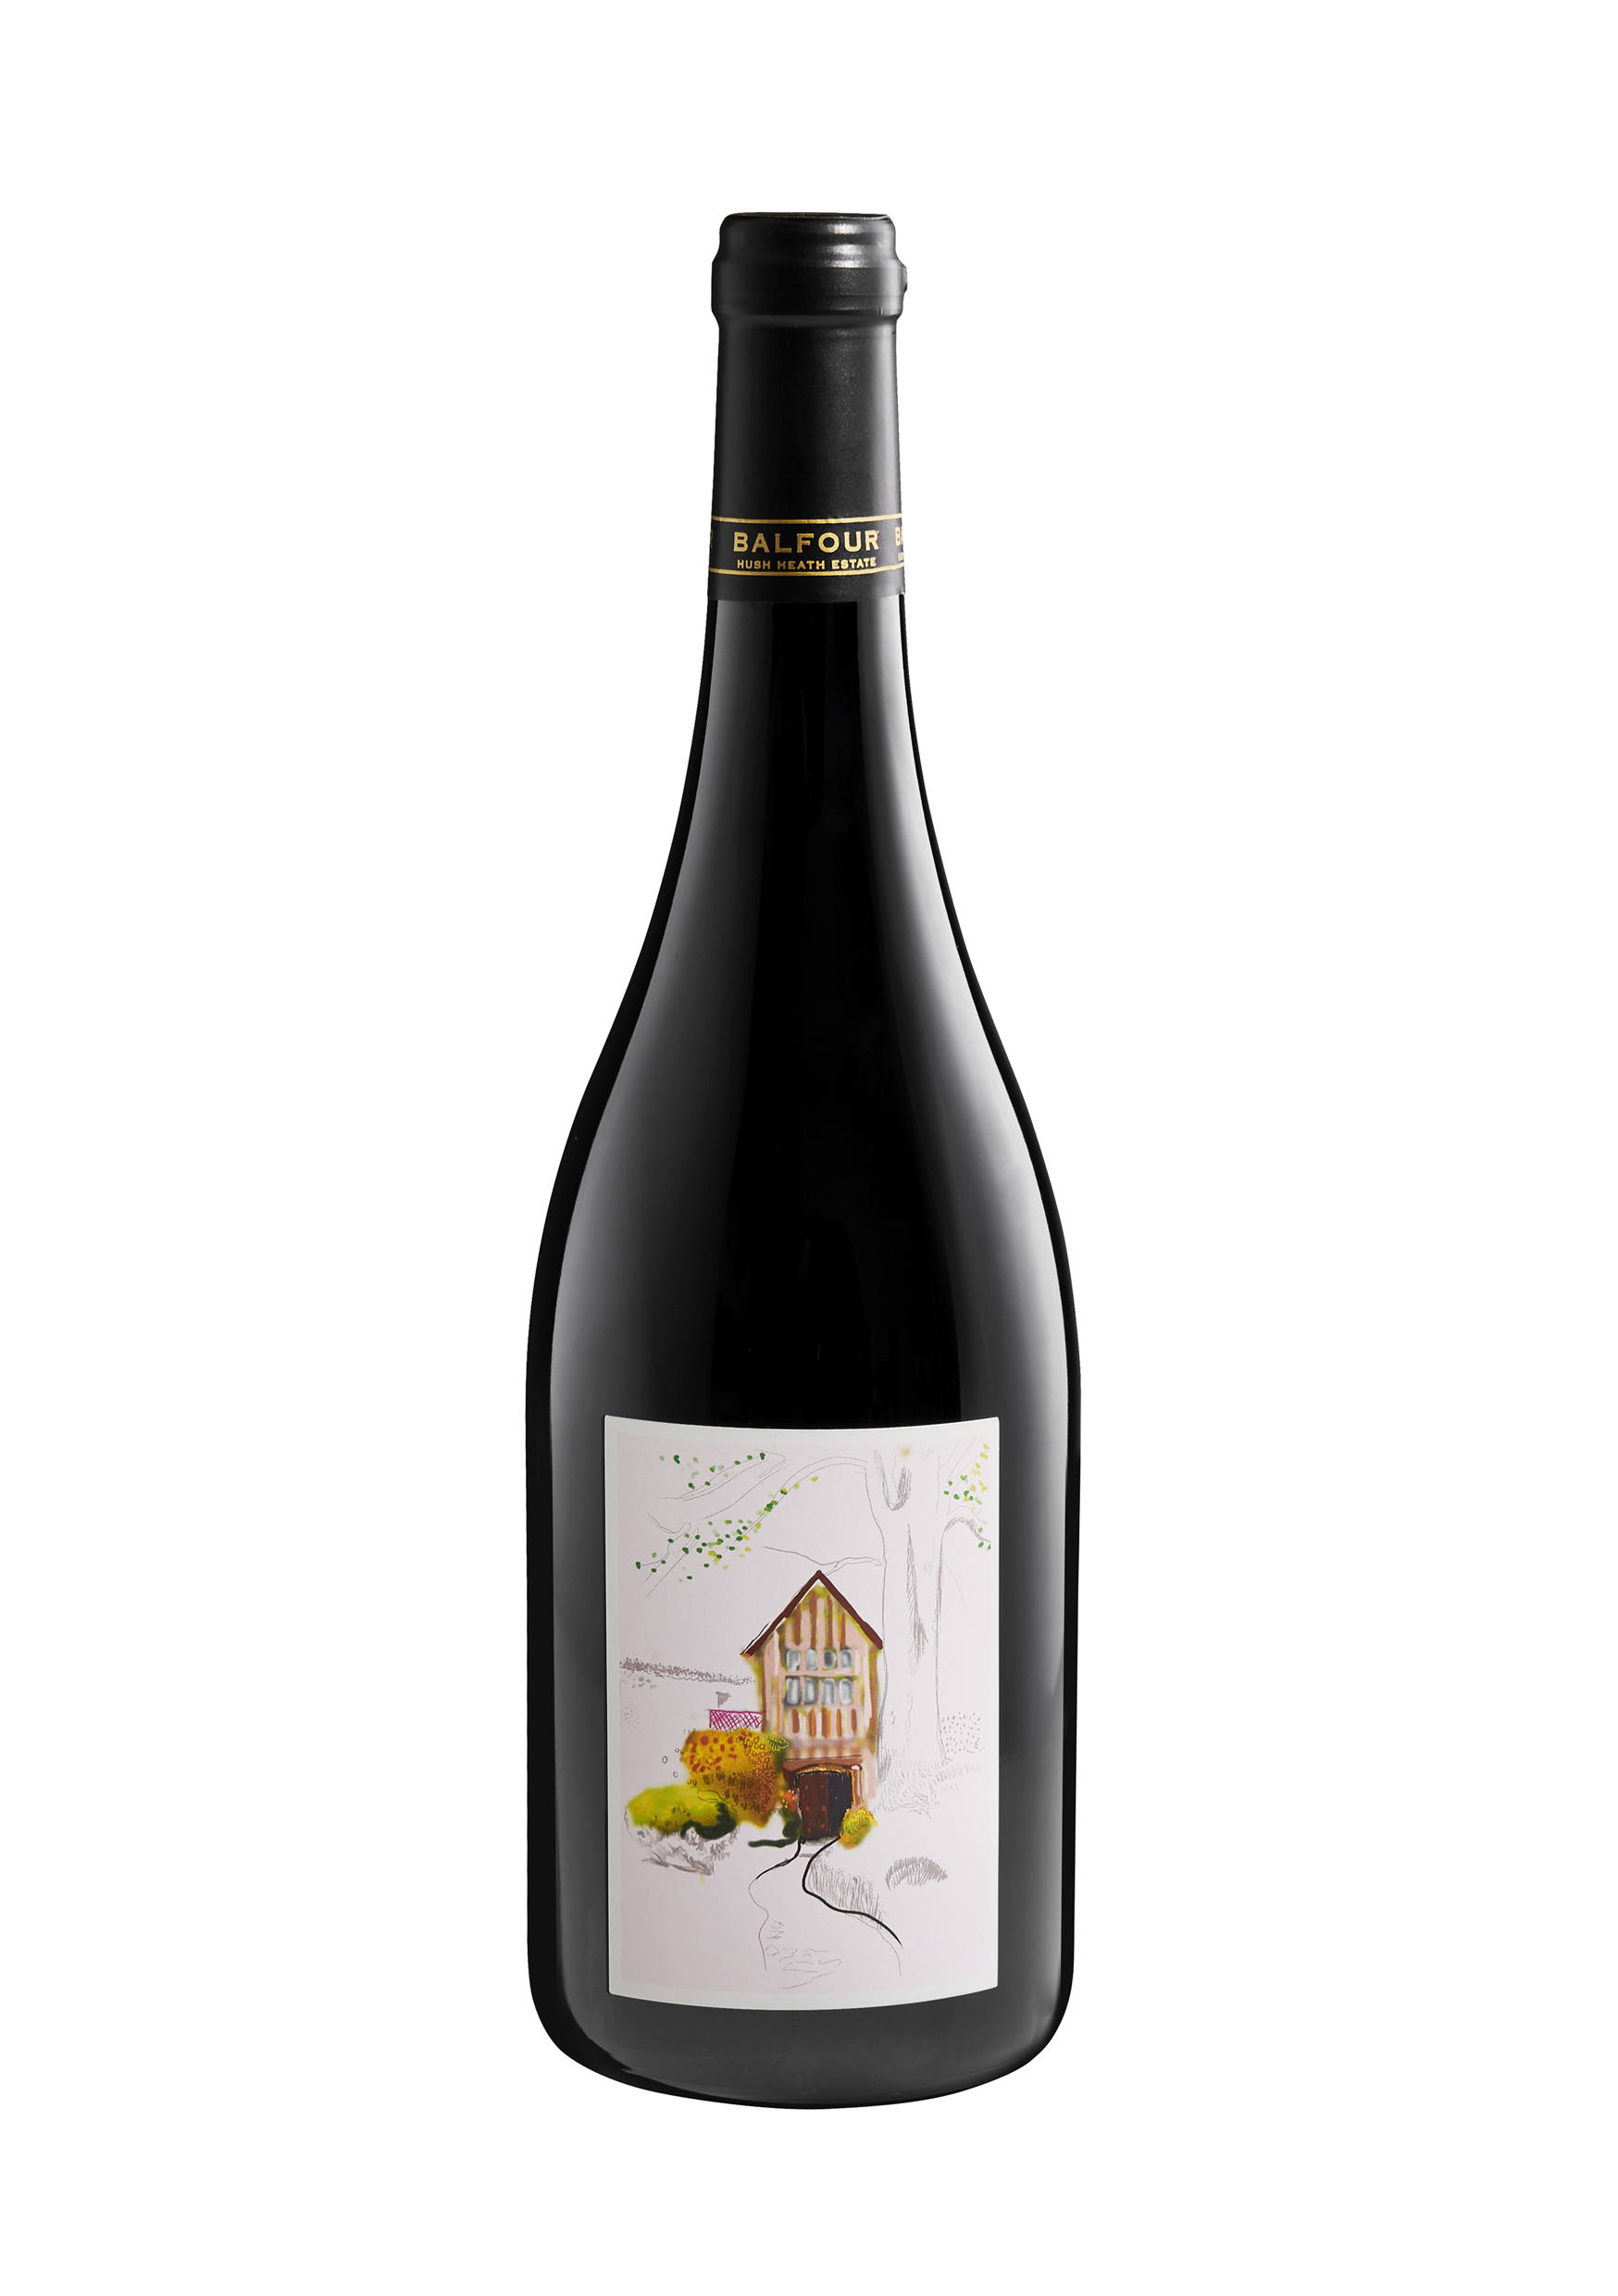 Balfour Cinque Ports Winemakers Collection